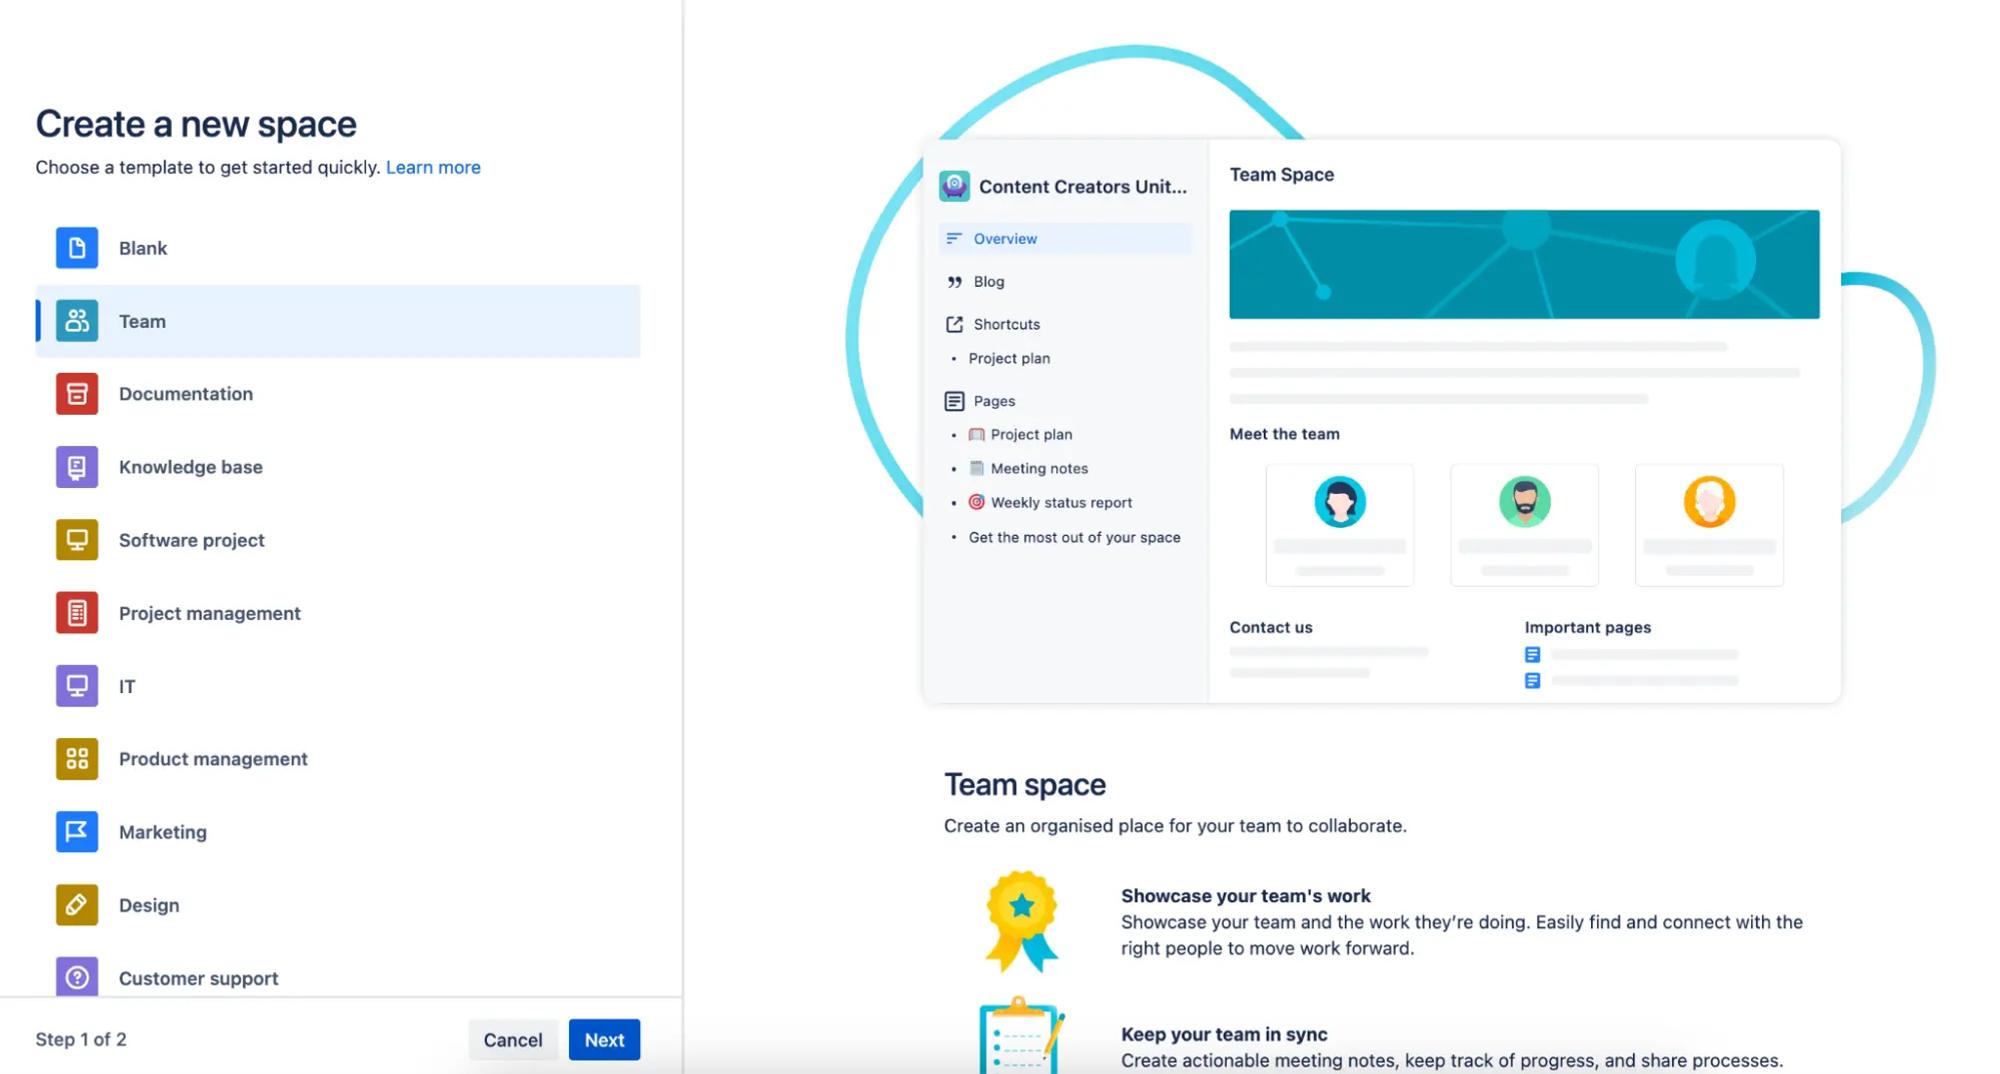 The 'Create a new space' dialog in Confluence with the Team space highlighted